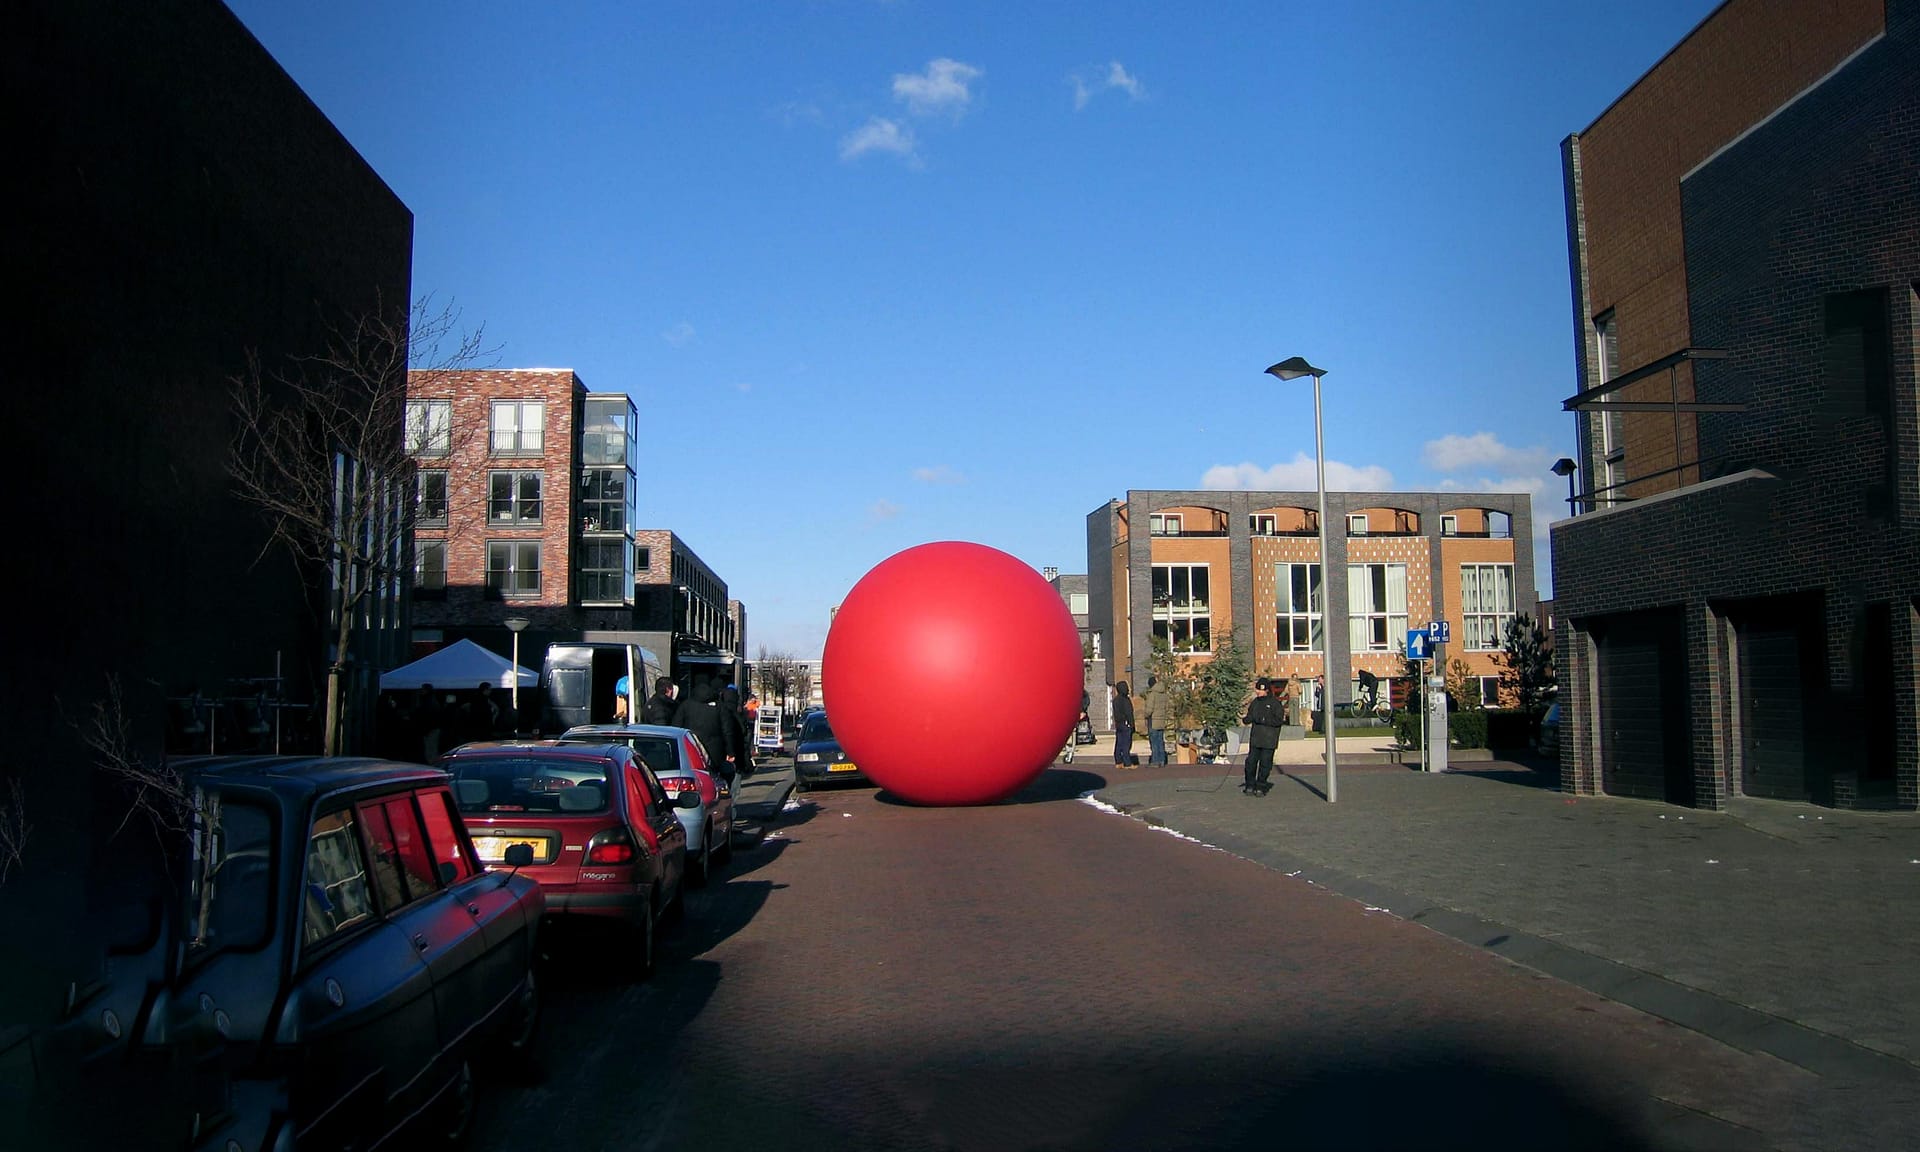 Large inflatable red ball